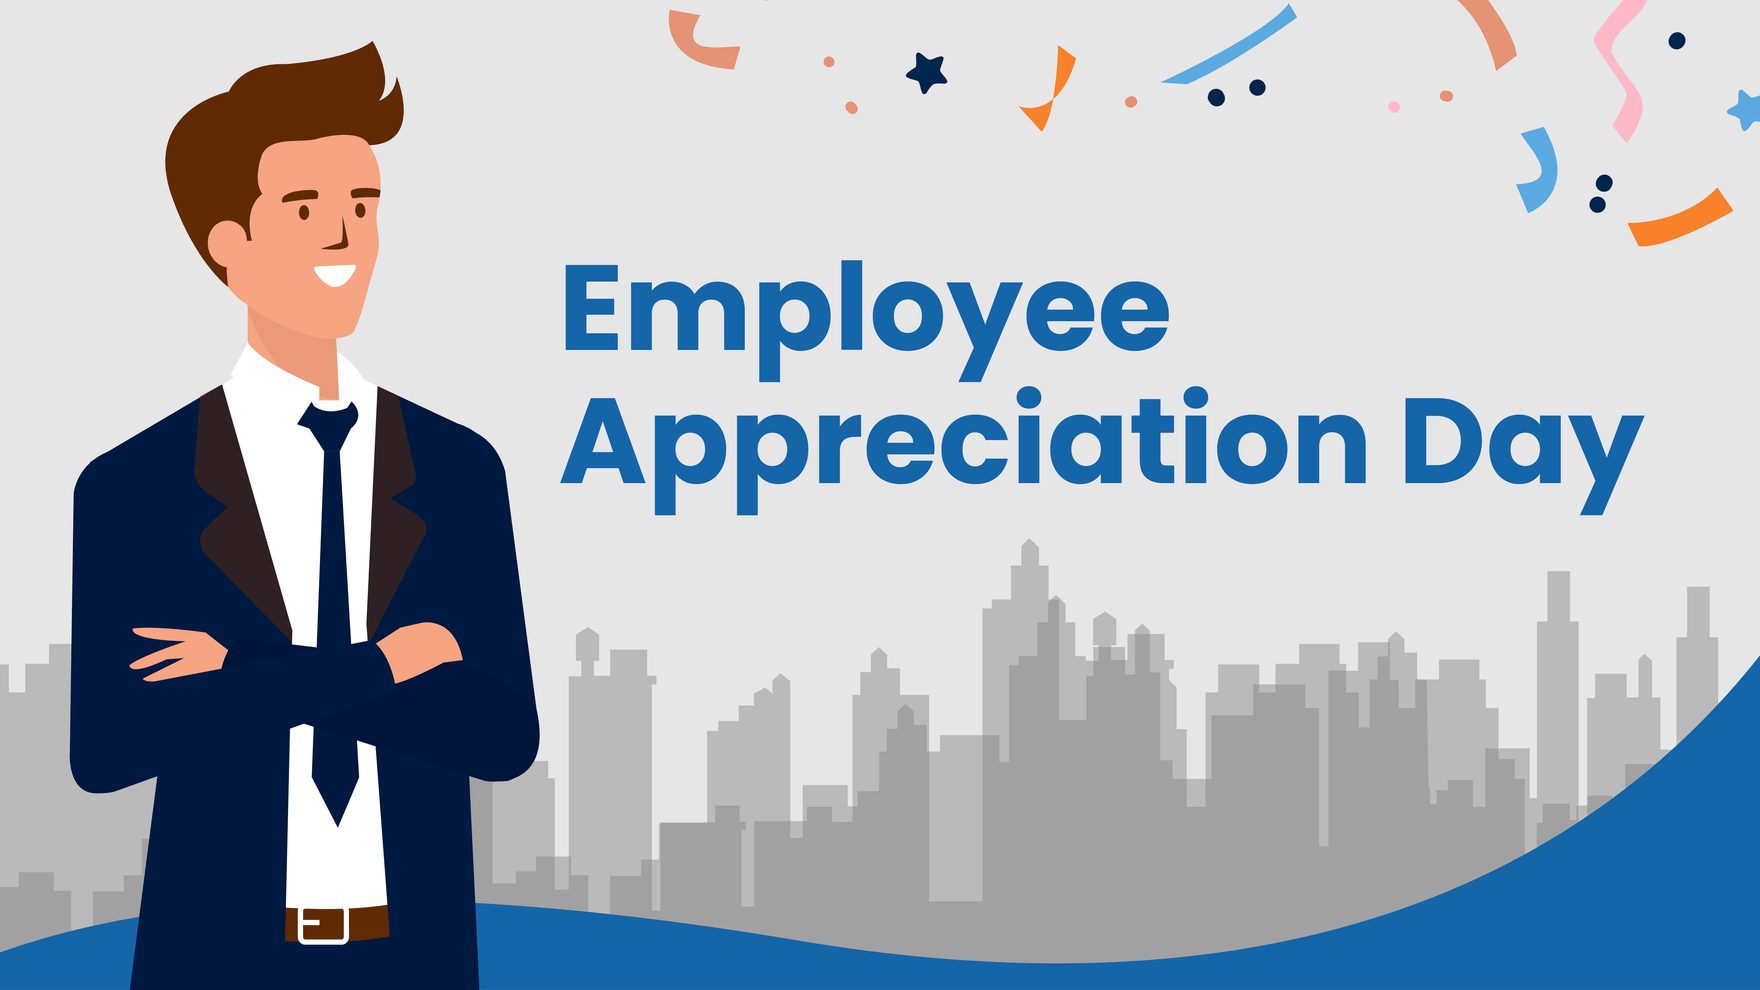 Free High Resolution Employee Appreciation Day Background in PDF, Illustrator, PSD, EPS, SVG, JPG, PNG